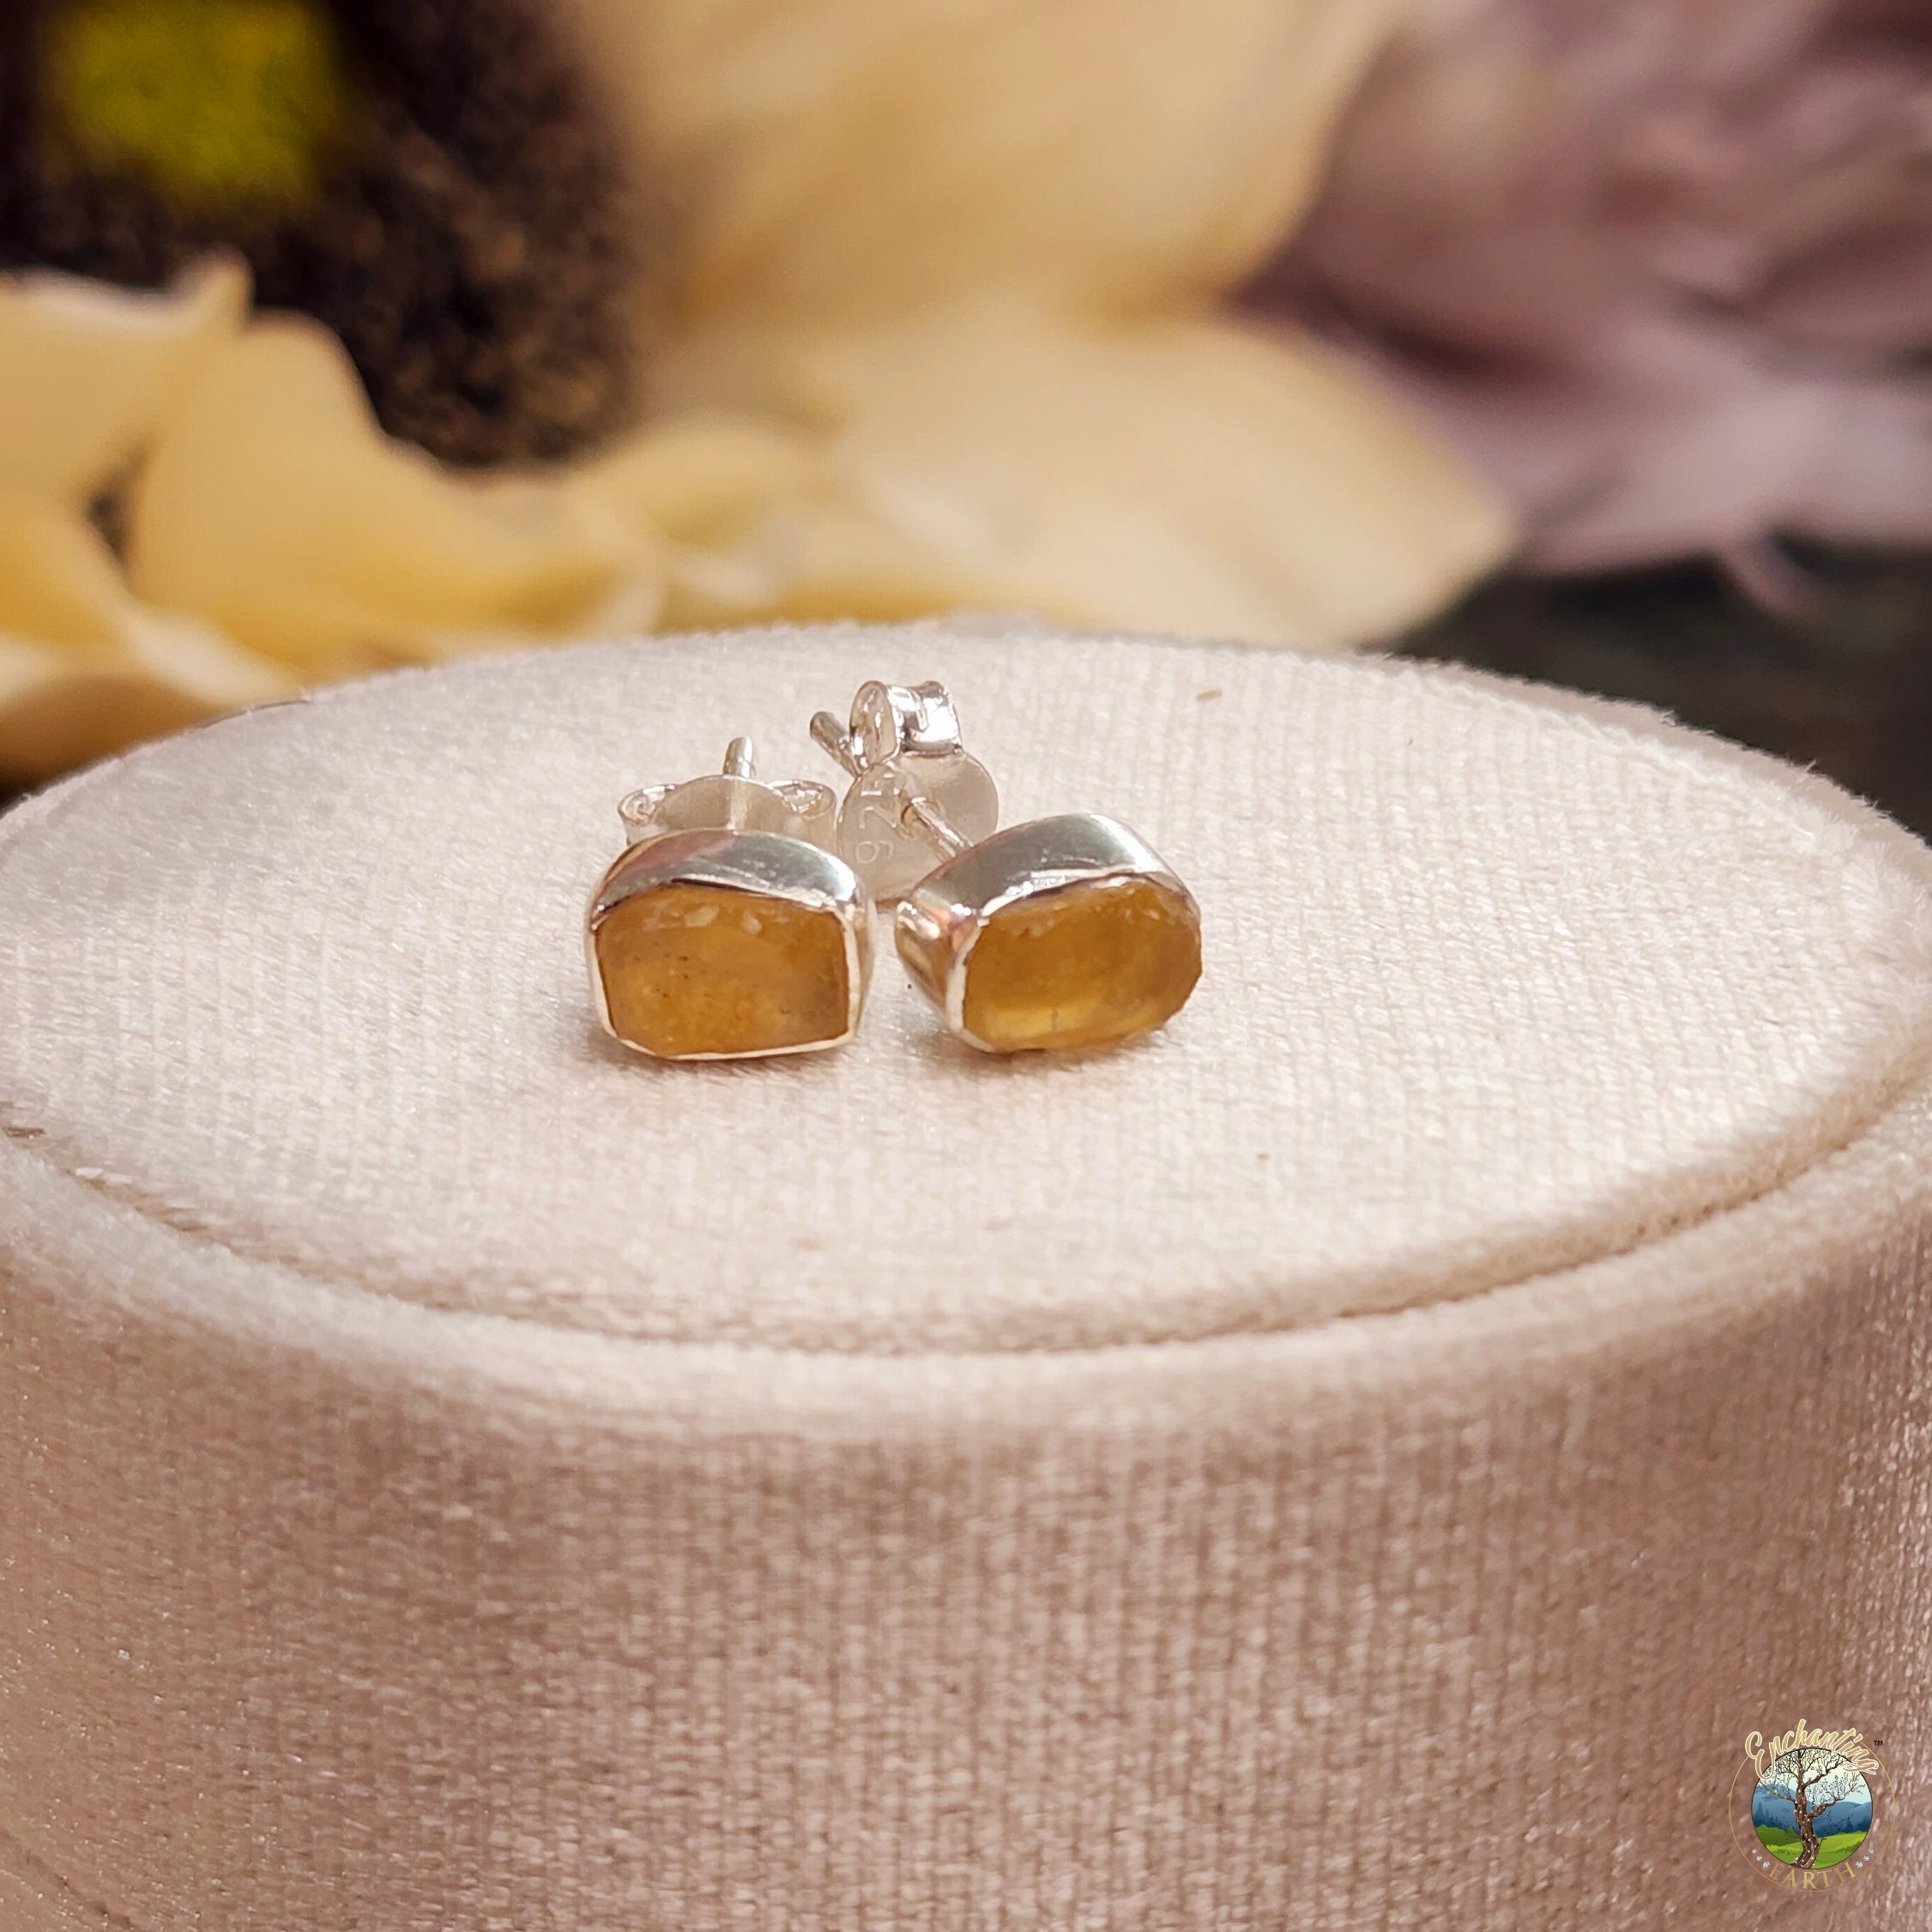 Libyan Desert Glass Raw .925 Silver Stud Earrings for Ascension and Manifesting